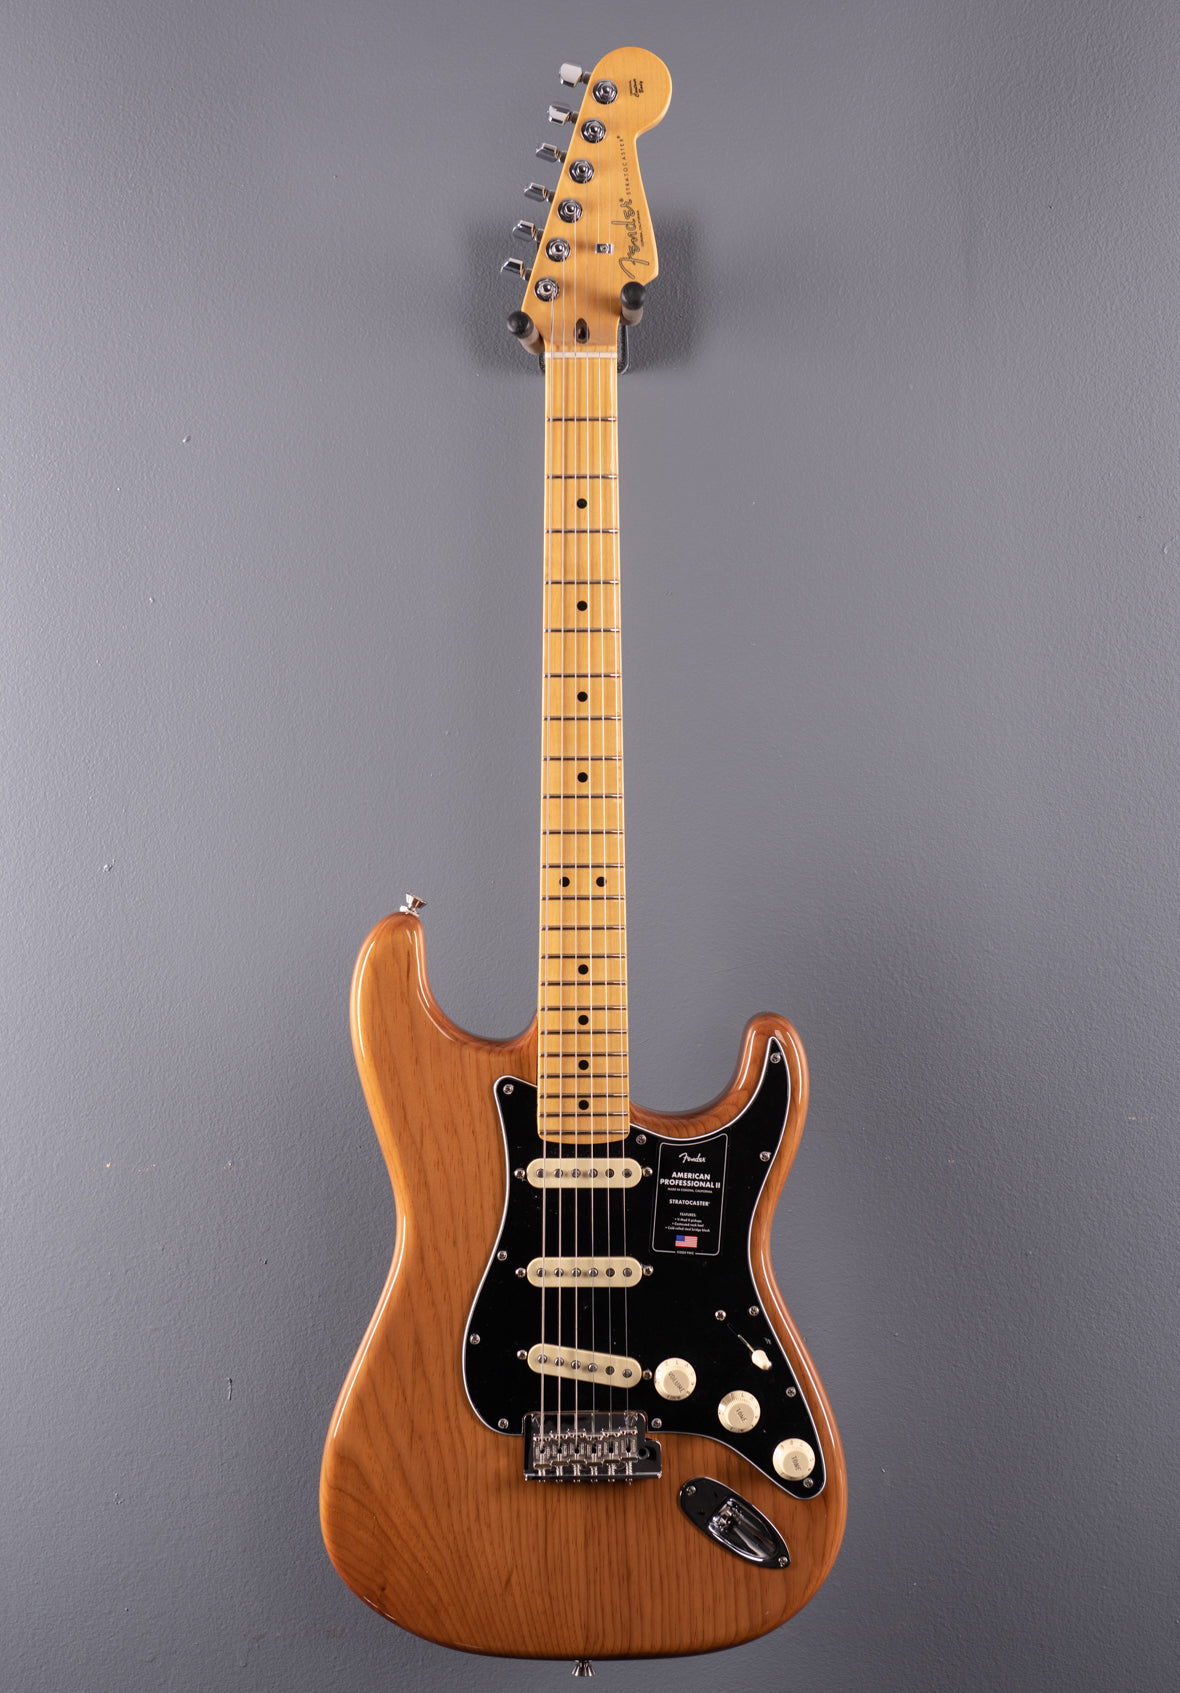 American Professional II Stratocaster - Roasted Pine w/Maple